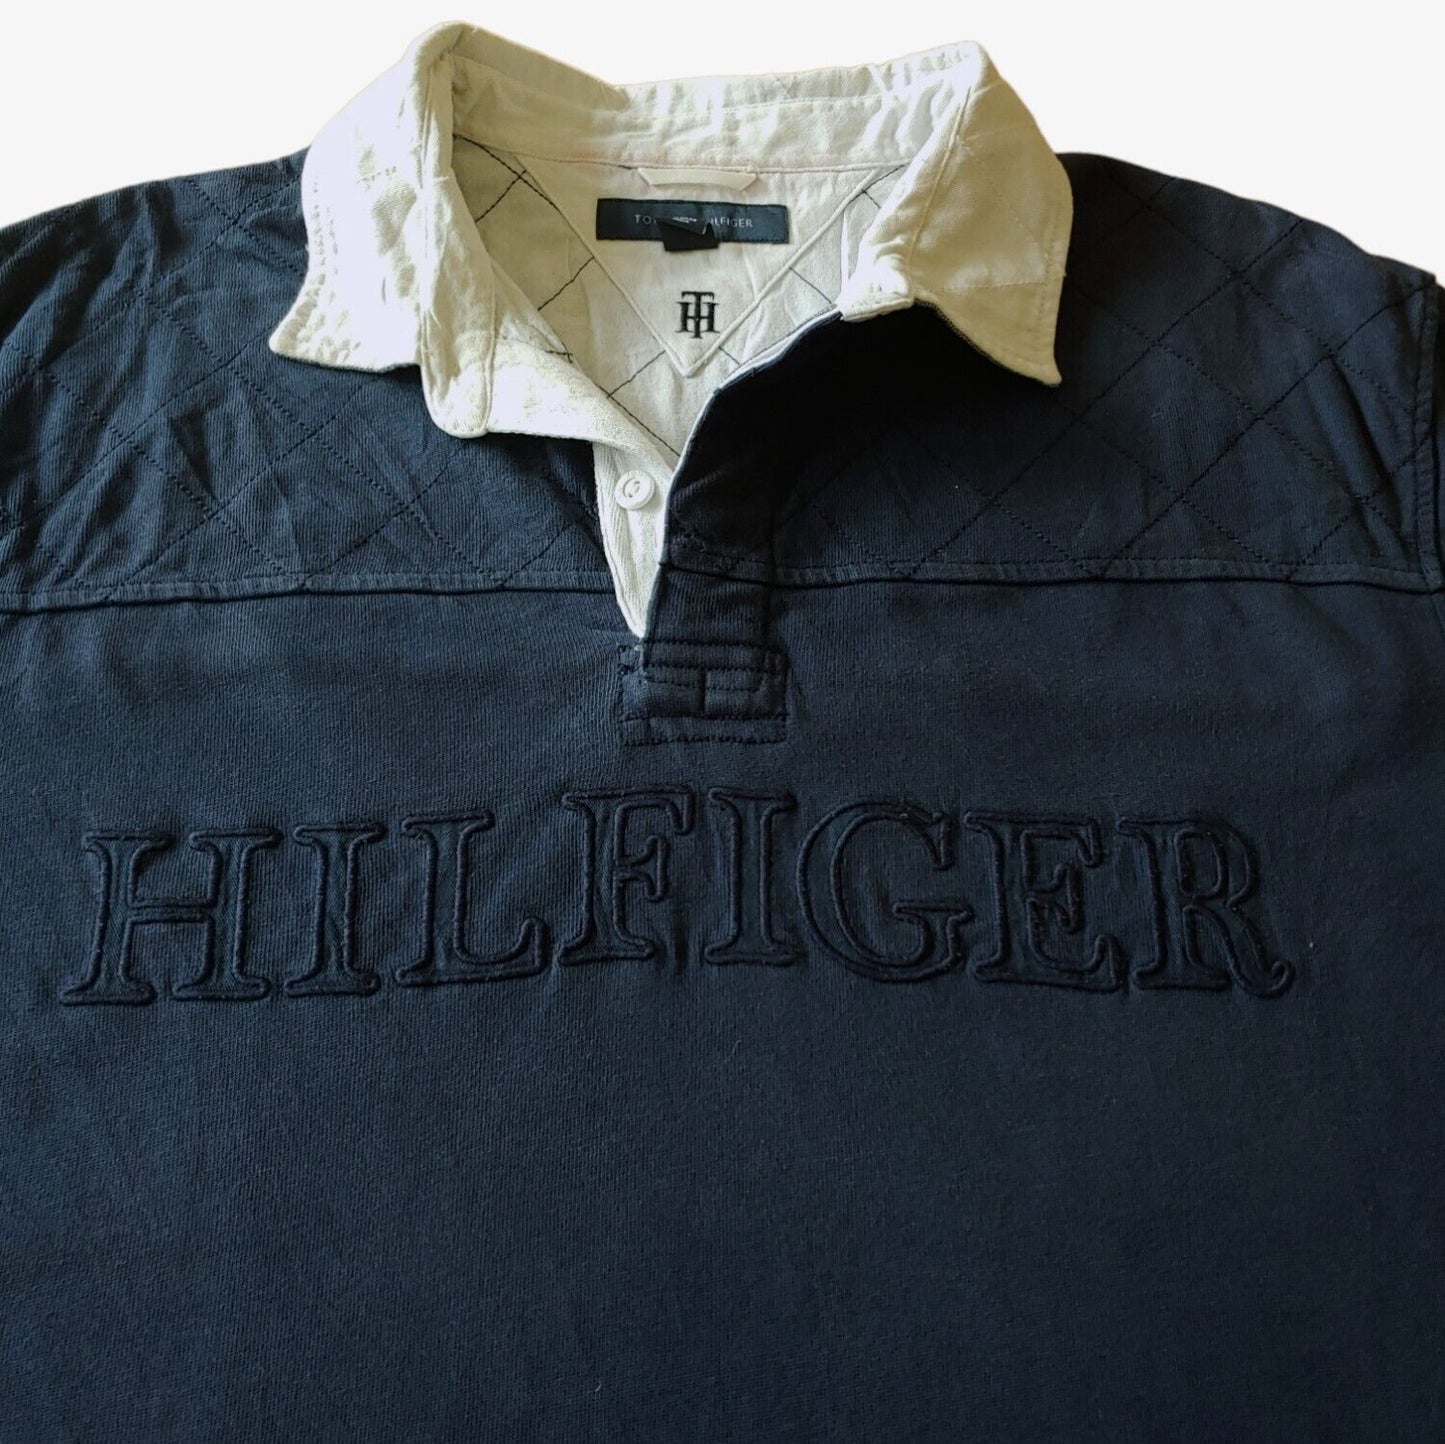 Vintage 90s Tommy Hilfiger Spell Out Navy Short Sleeve Rugby Shirt Logo - Casspios Dream